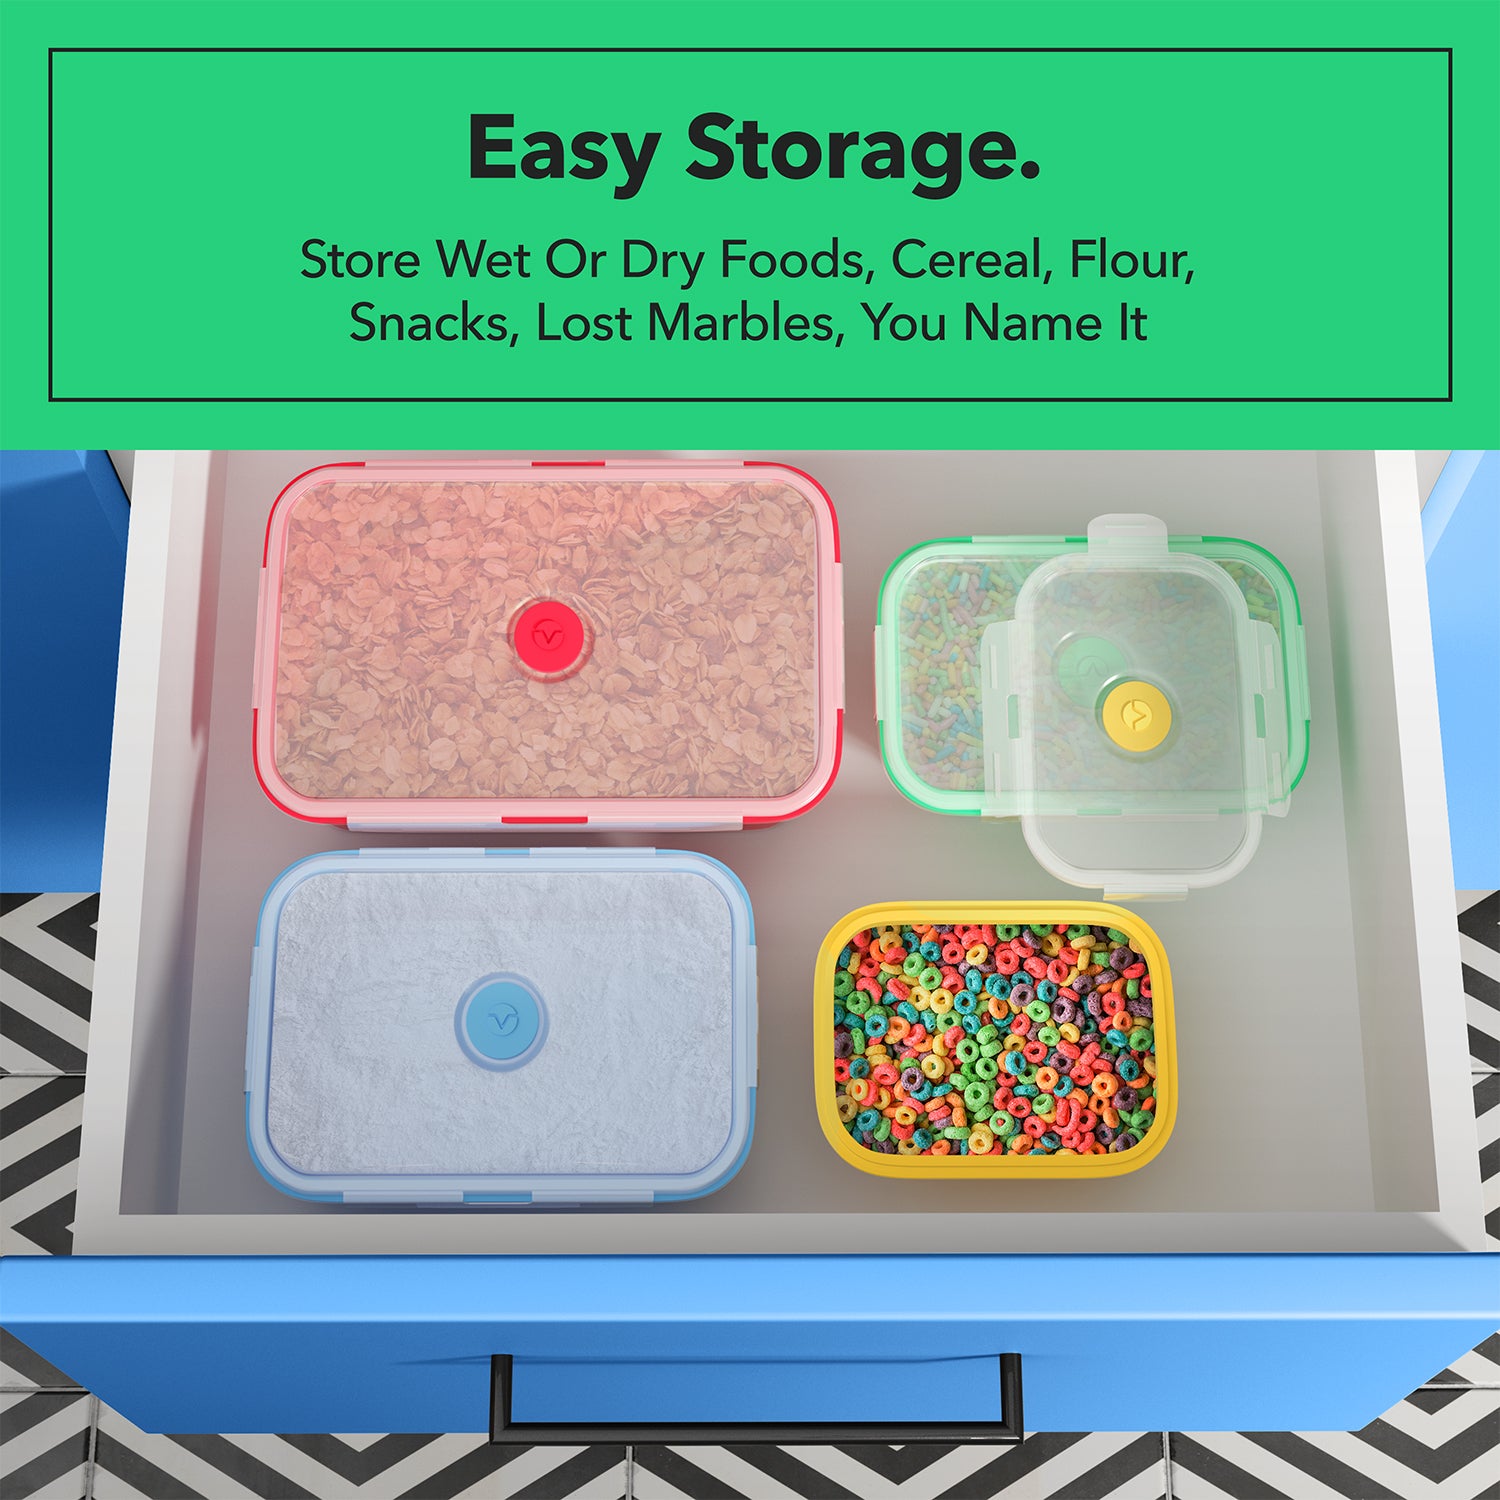 Collapse-it Silicone Food Storage Containers Sampler Pack - Airtight  Silicone Lids - Collapsible Lunch Box - Oven, Microwave, Freezer Safe +  eBook - 4